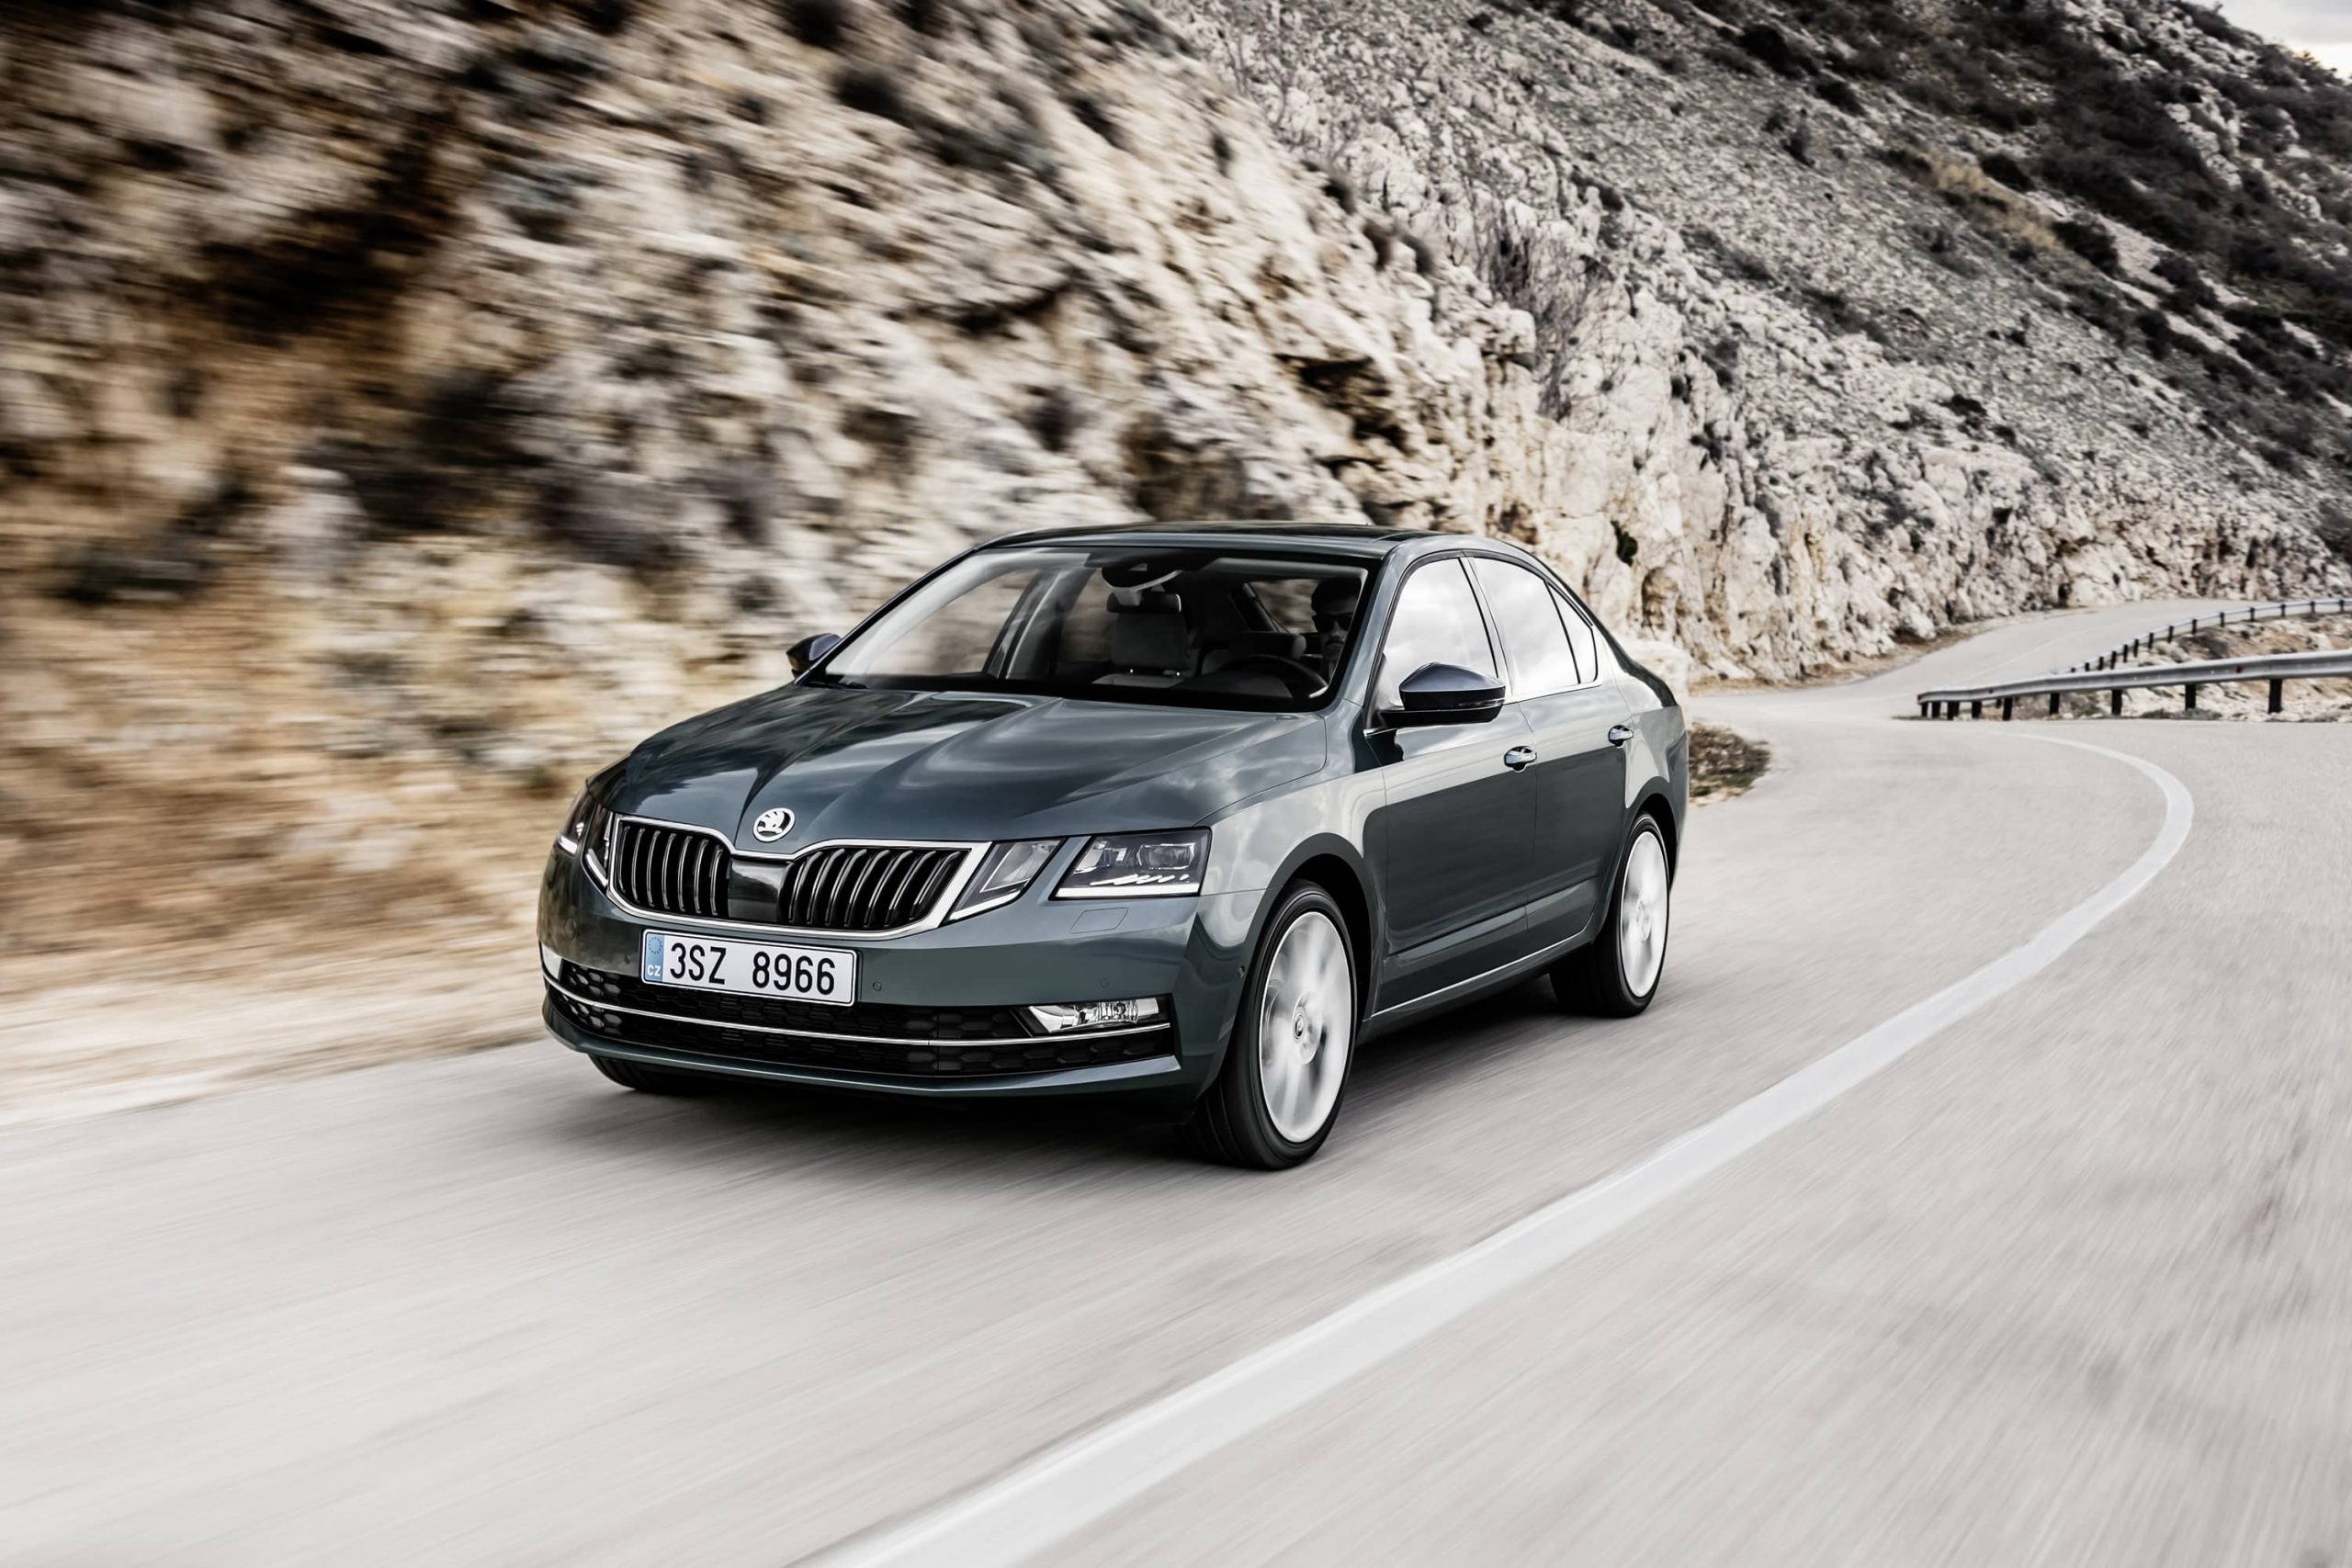 Skoda Octavia used for our top 10 taxis blog